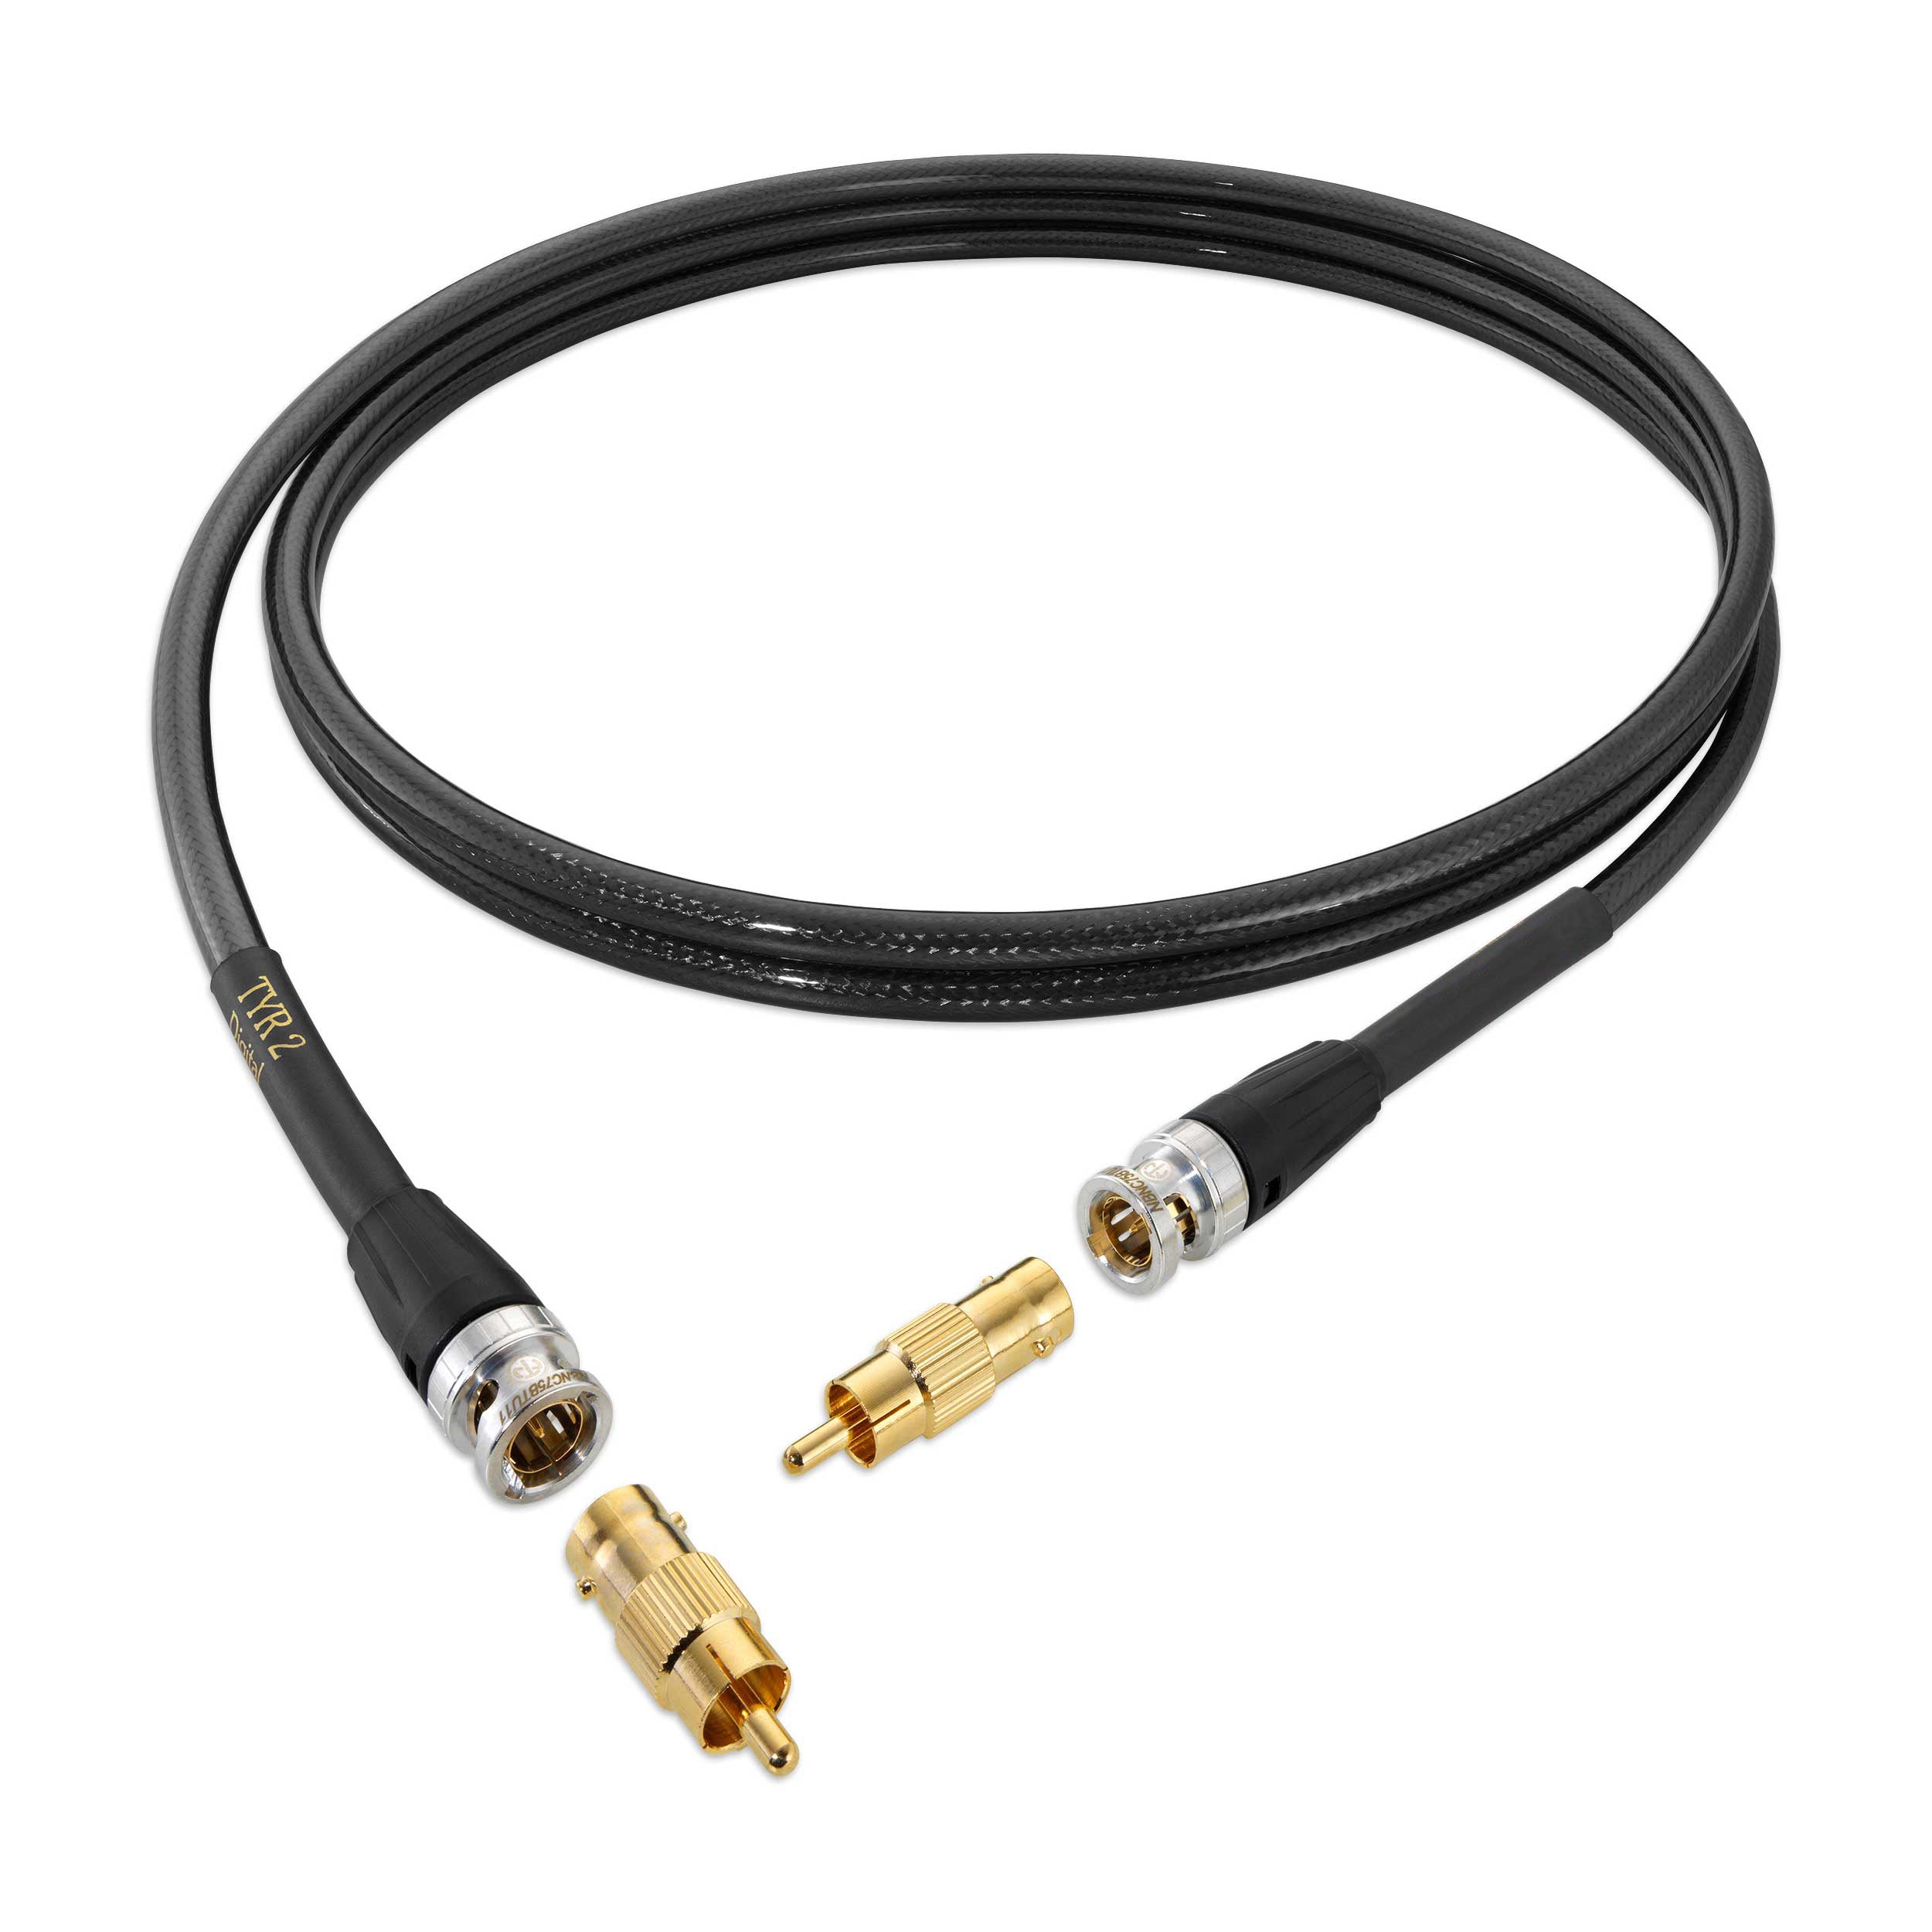 Nordost Norse Tyr 2 Digital Interconnect Cable